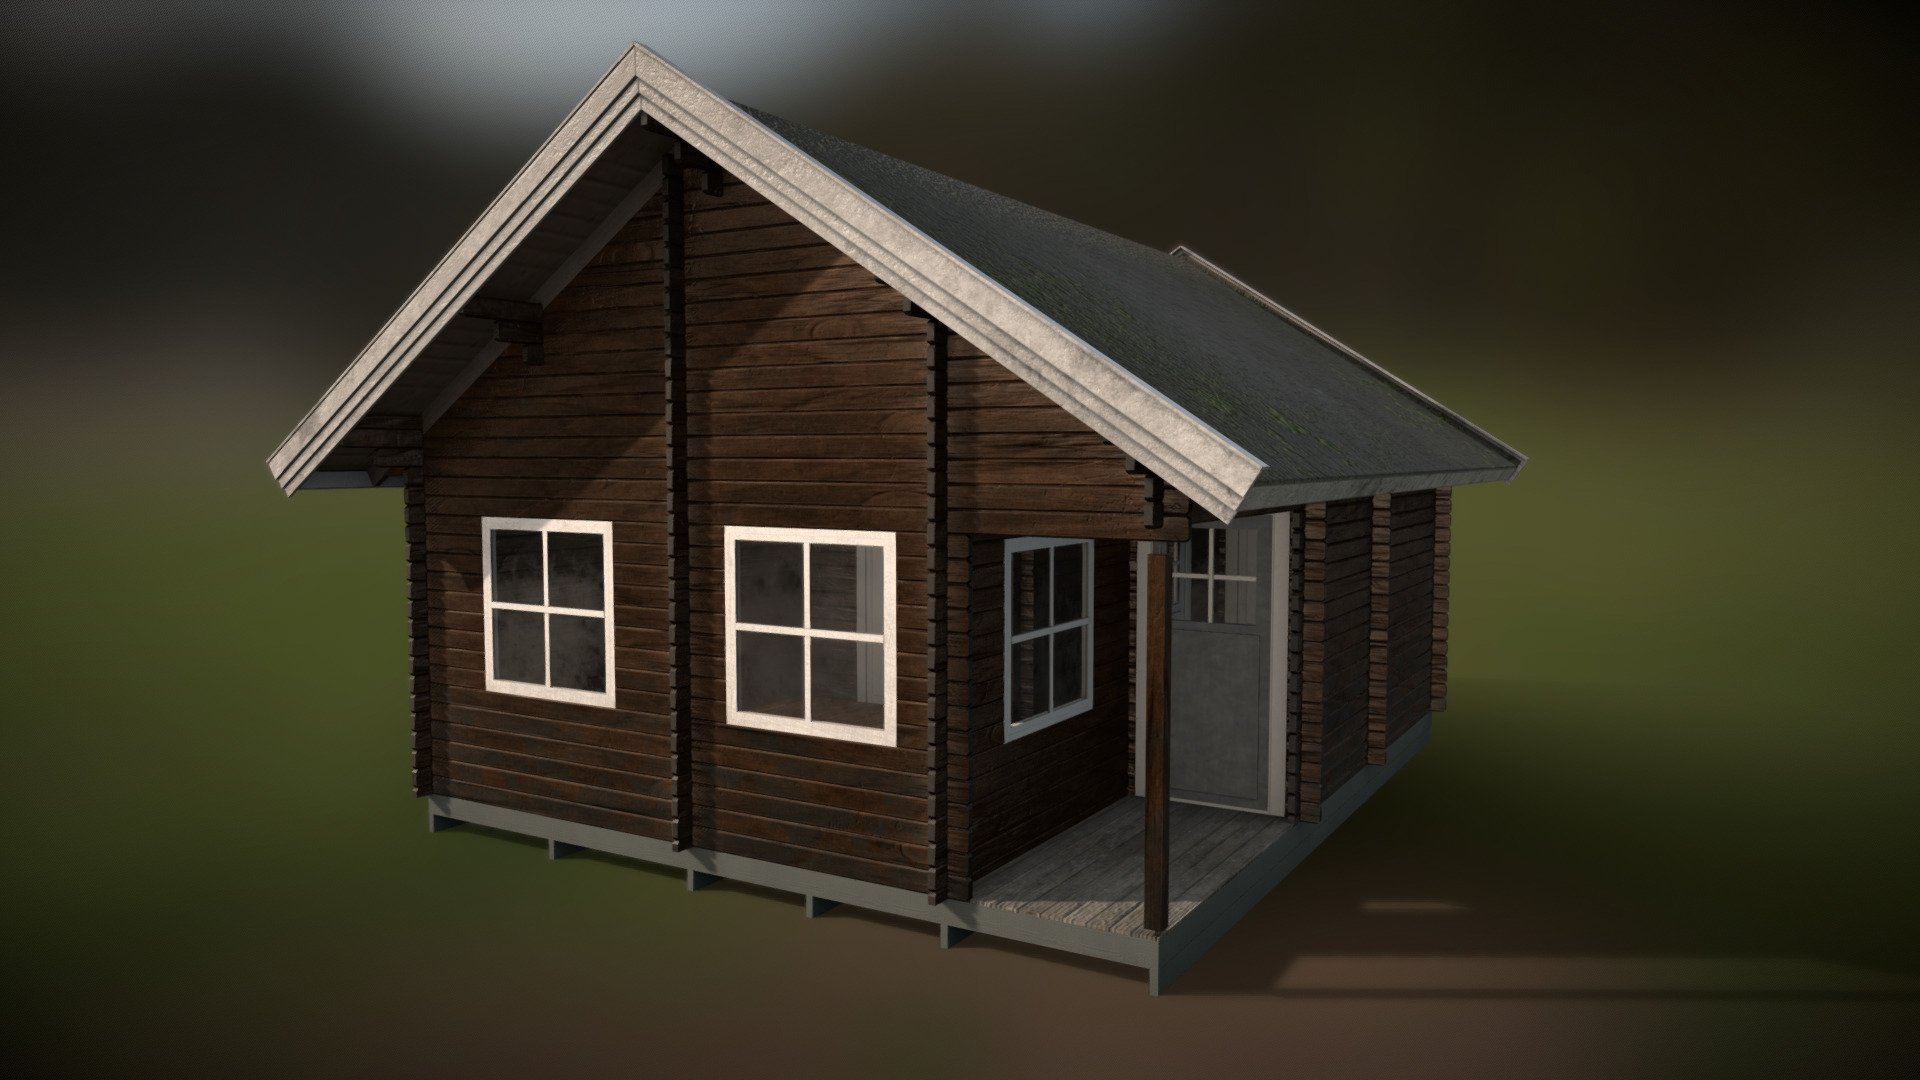 40 m² log cabin.
designed for polhusAB in 2004, named after my sister.
modeled in 3dsMax, textured in substance painter and exported in blender 3d model